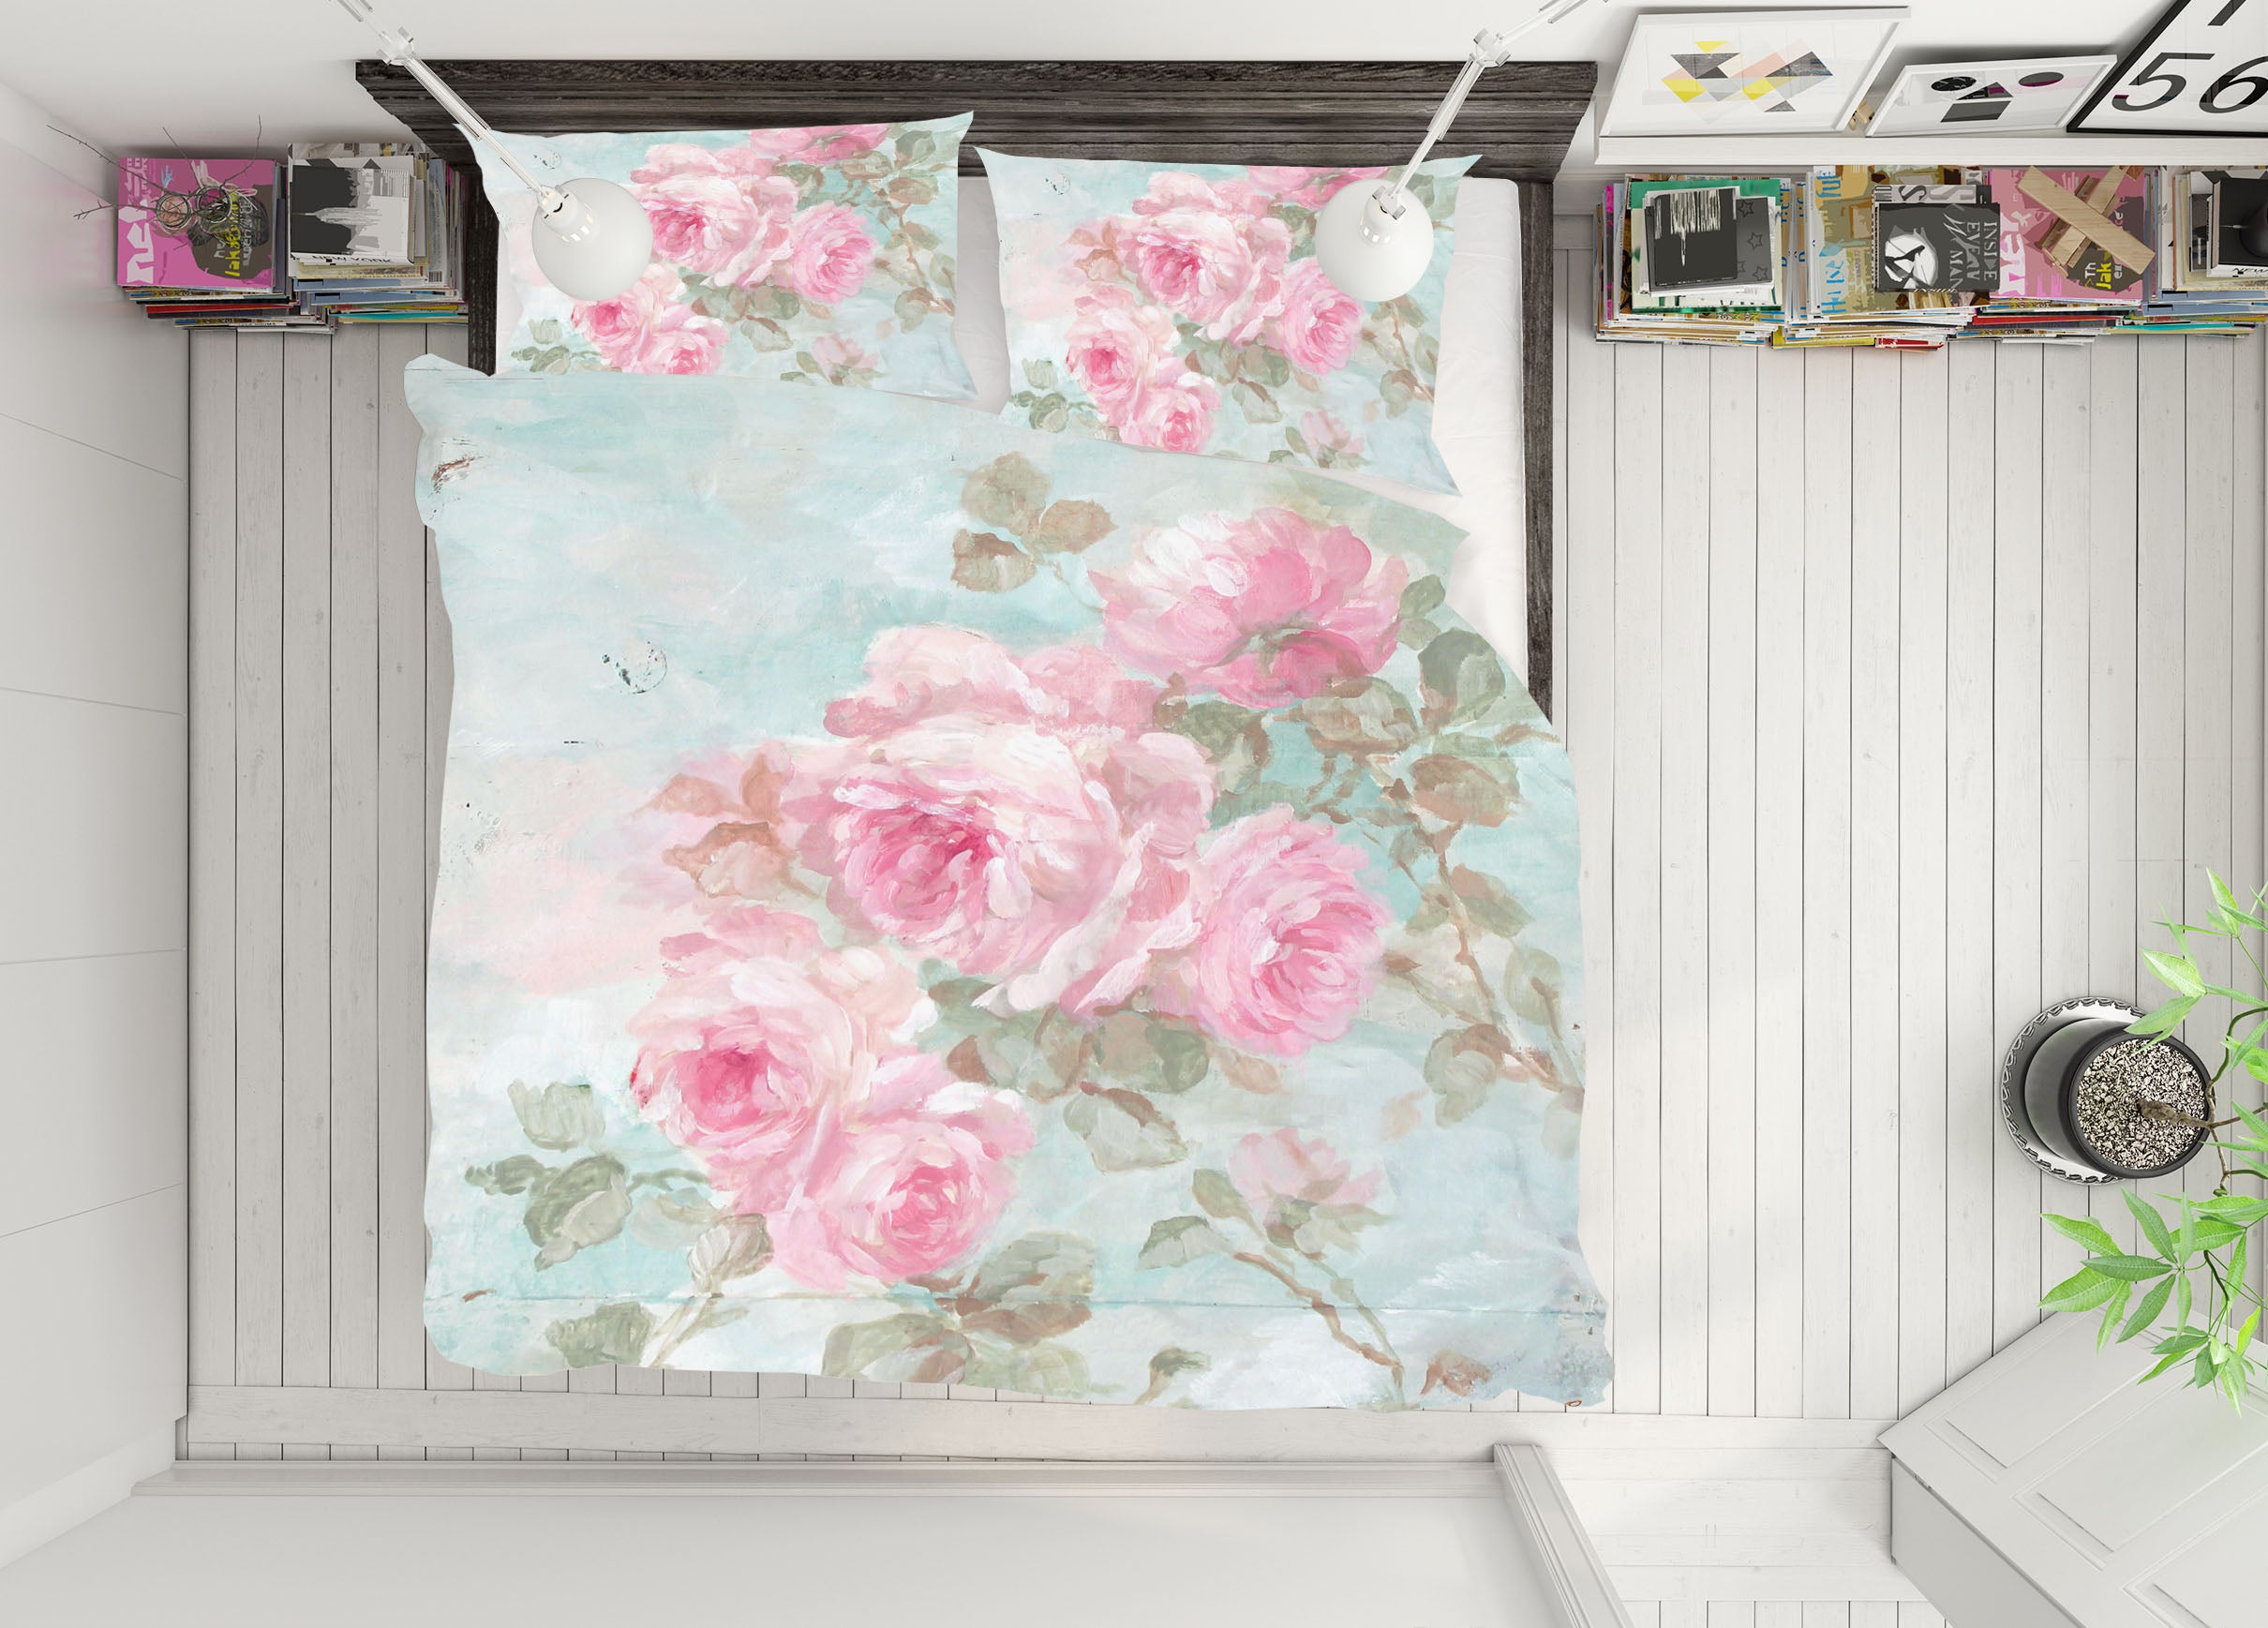 3D Roses Blooming 109 Debi Coules Bedding Bed Pillowcases Quilt